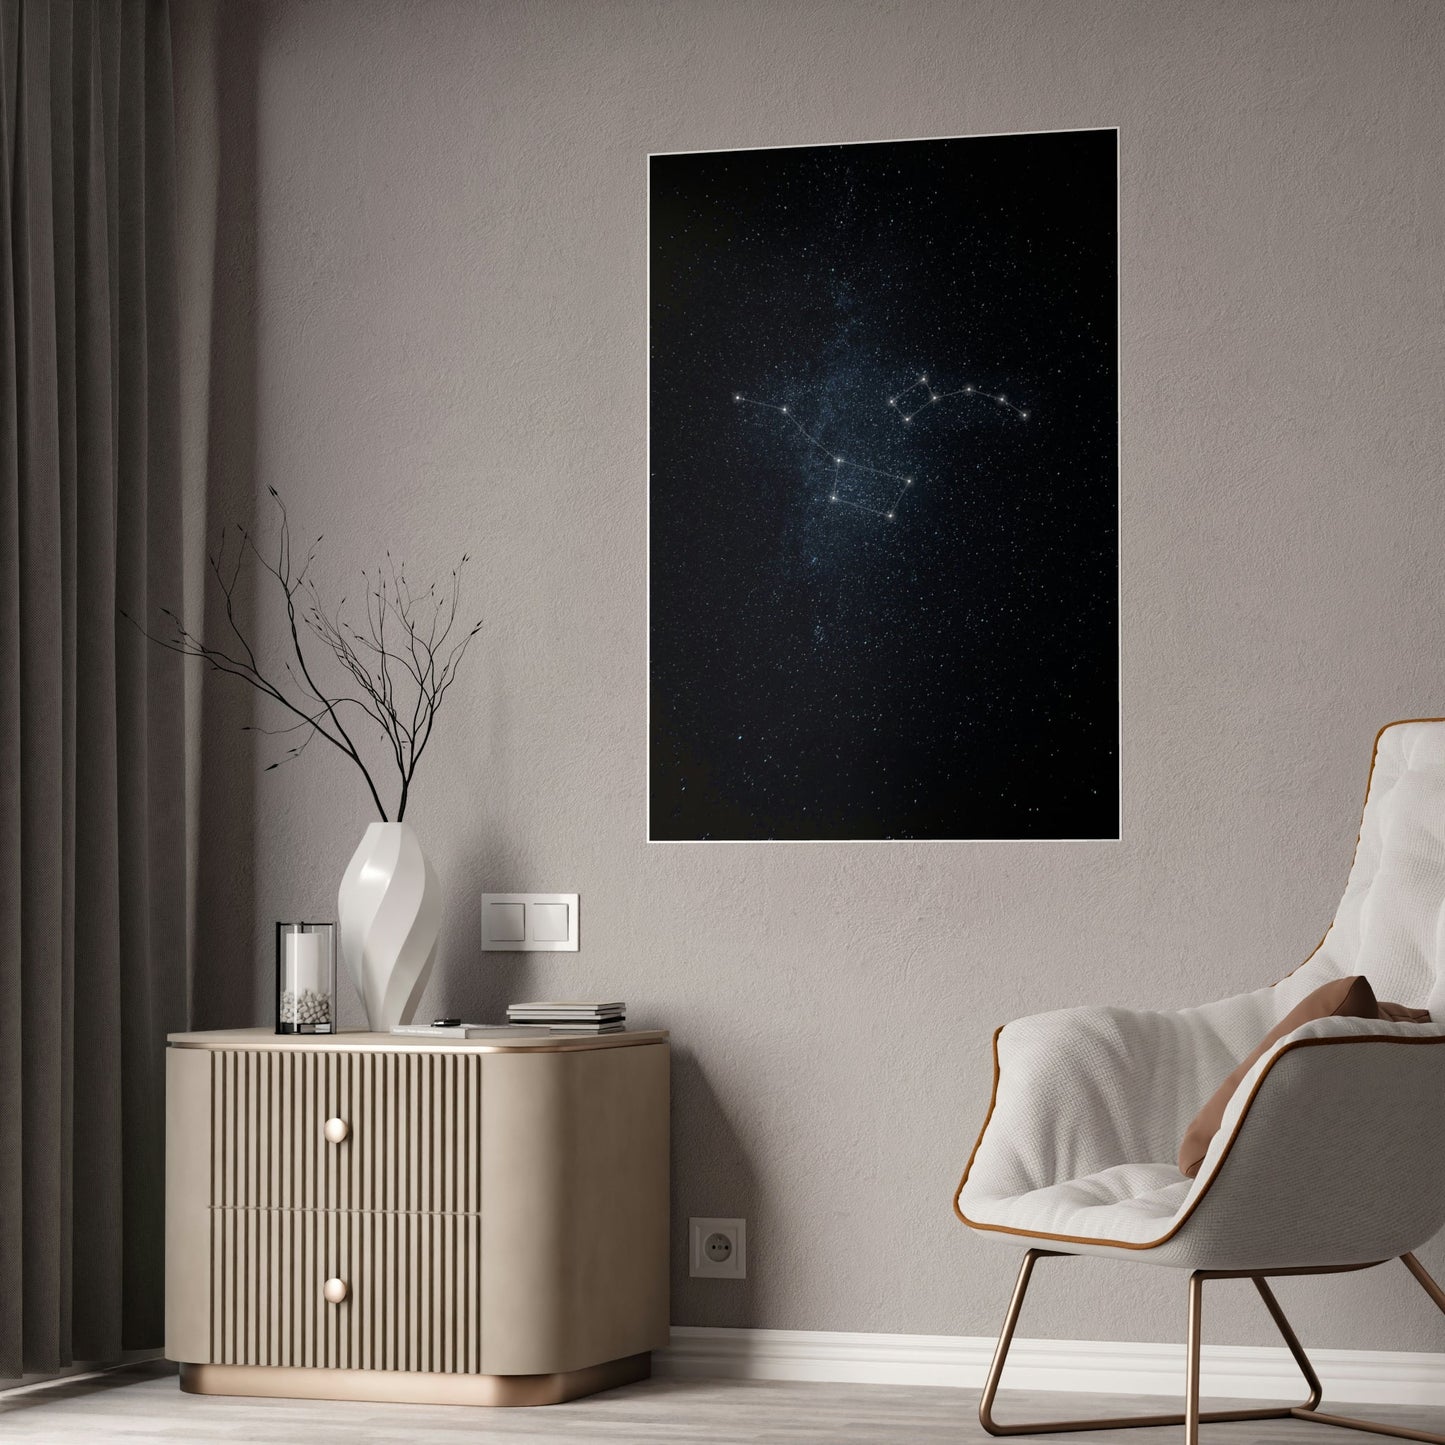 Cosmic Beauty: A Framed Canvas & Poster of Starry Constellations